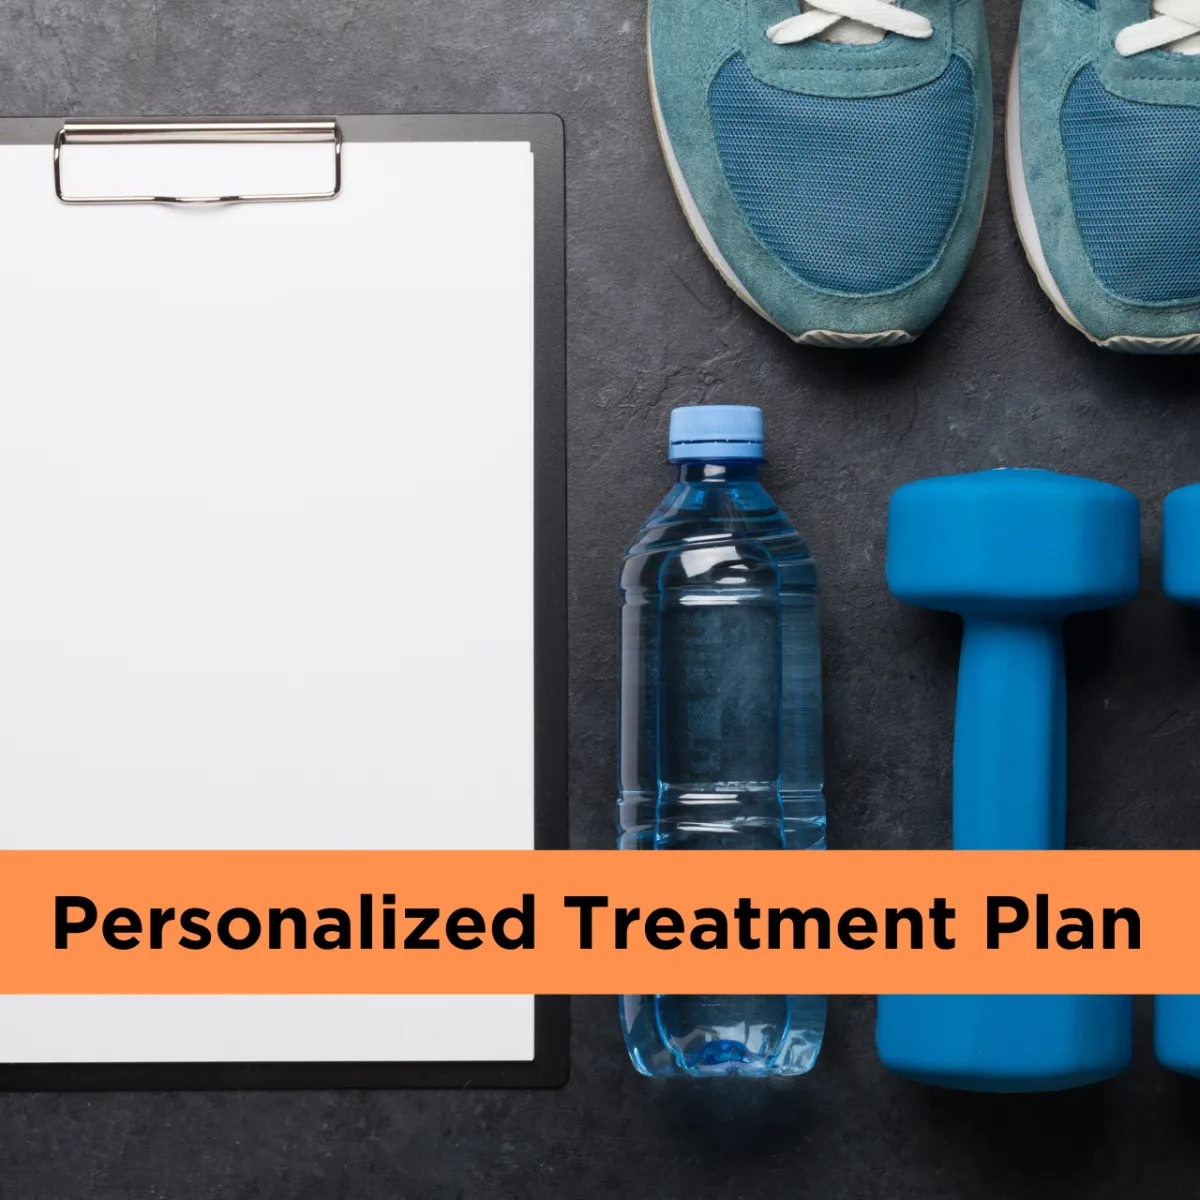 Step 4: Personalized Treatment Plan - dad bod dad bods fat dad fat dads Beat The Dad Bod USA Beat The Dad Bod Coaching Health Consultant Remote Fitness Coach Health Coaching Nutritionist dad bod cookie dad bod dad bod workout plan at fitness coach dad fitness dad bod gym fitness remote the health and fitness coach health fitness dad bod fitness health fitness usa the fitness coach coach to fitness consultant fitness fit coach workout home bod coach remote fitness wellness coach fitness and wellness coach dad bod workout health and fitness coach health fitness coach fitness coach usa remote fitness coach fitness coach home workout online personal trainer fitness coach app personal trainer at home personal trainer app gym guys gym coach online gym trainer best personal trainer app fitness on the go personal training consultants online fitness trainer online fitness coach fitness coach app training coach coach gym personal trainer personal trainer gym trainer app fitness trainer course